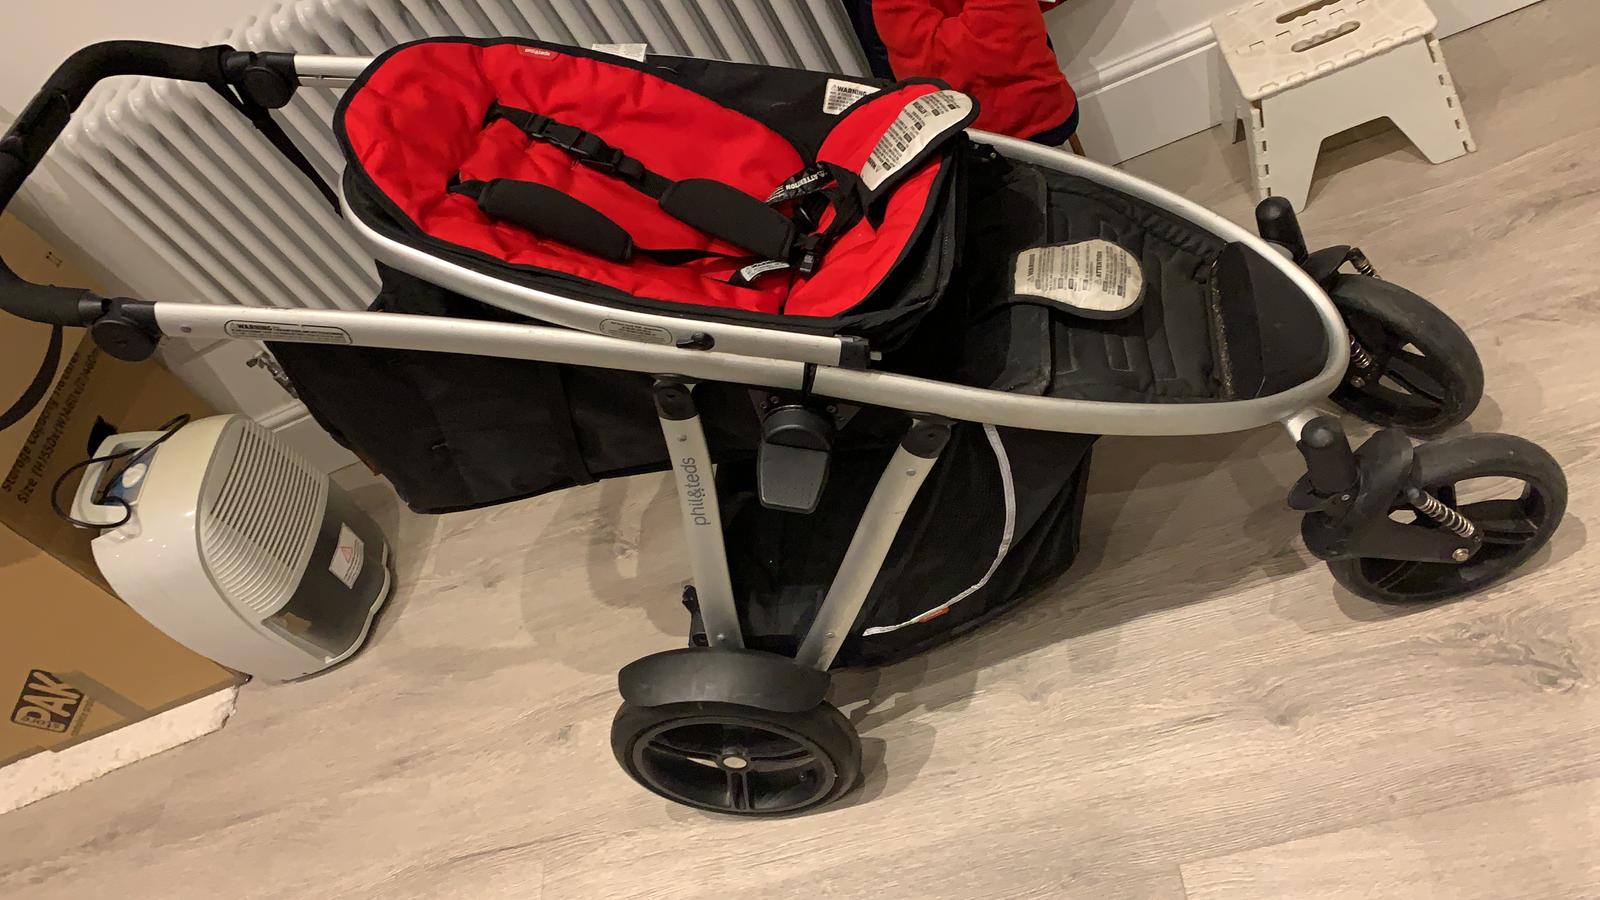 second hand double pushchairs for sale